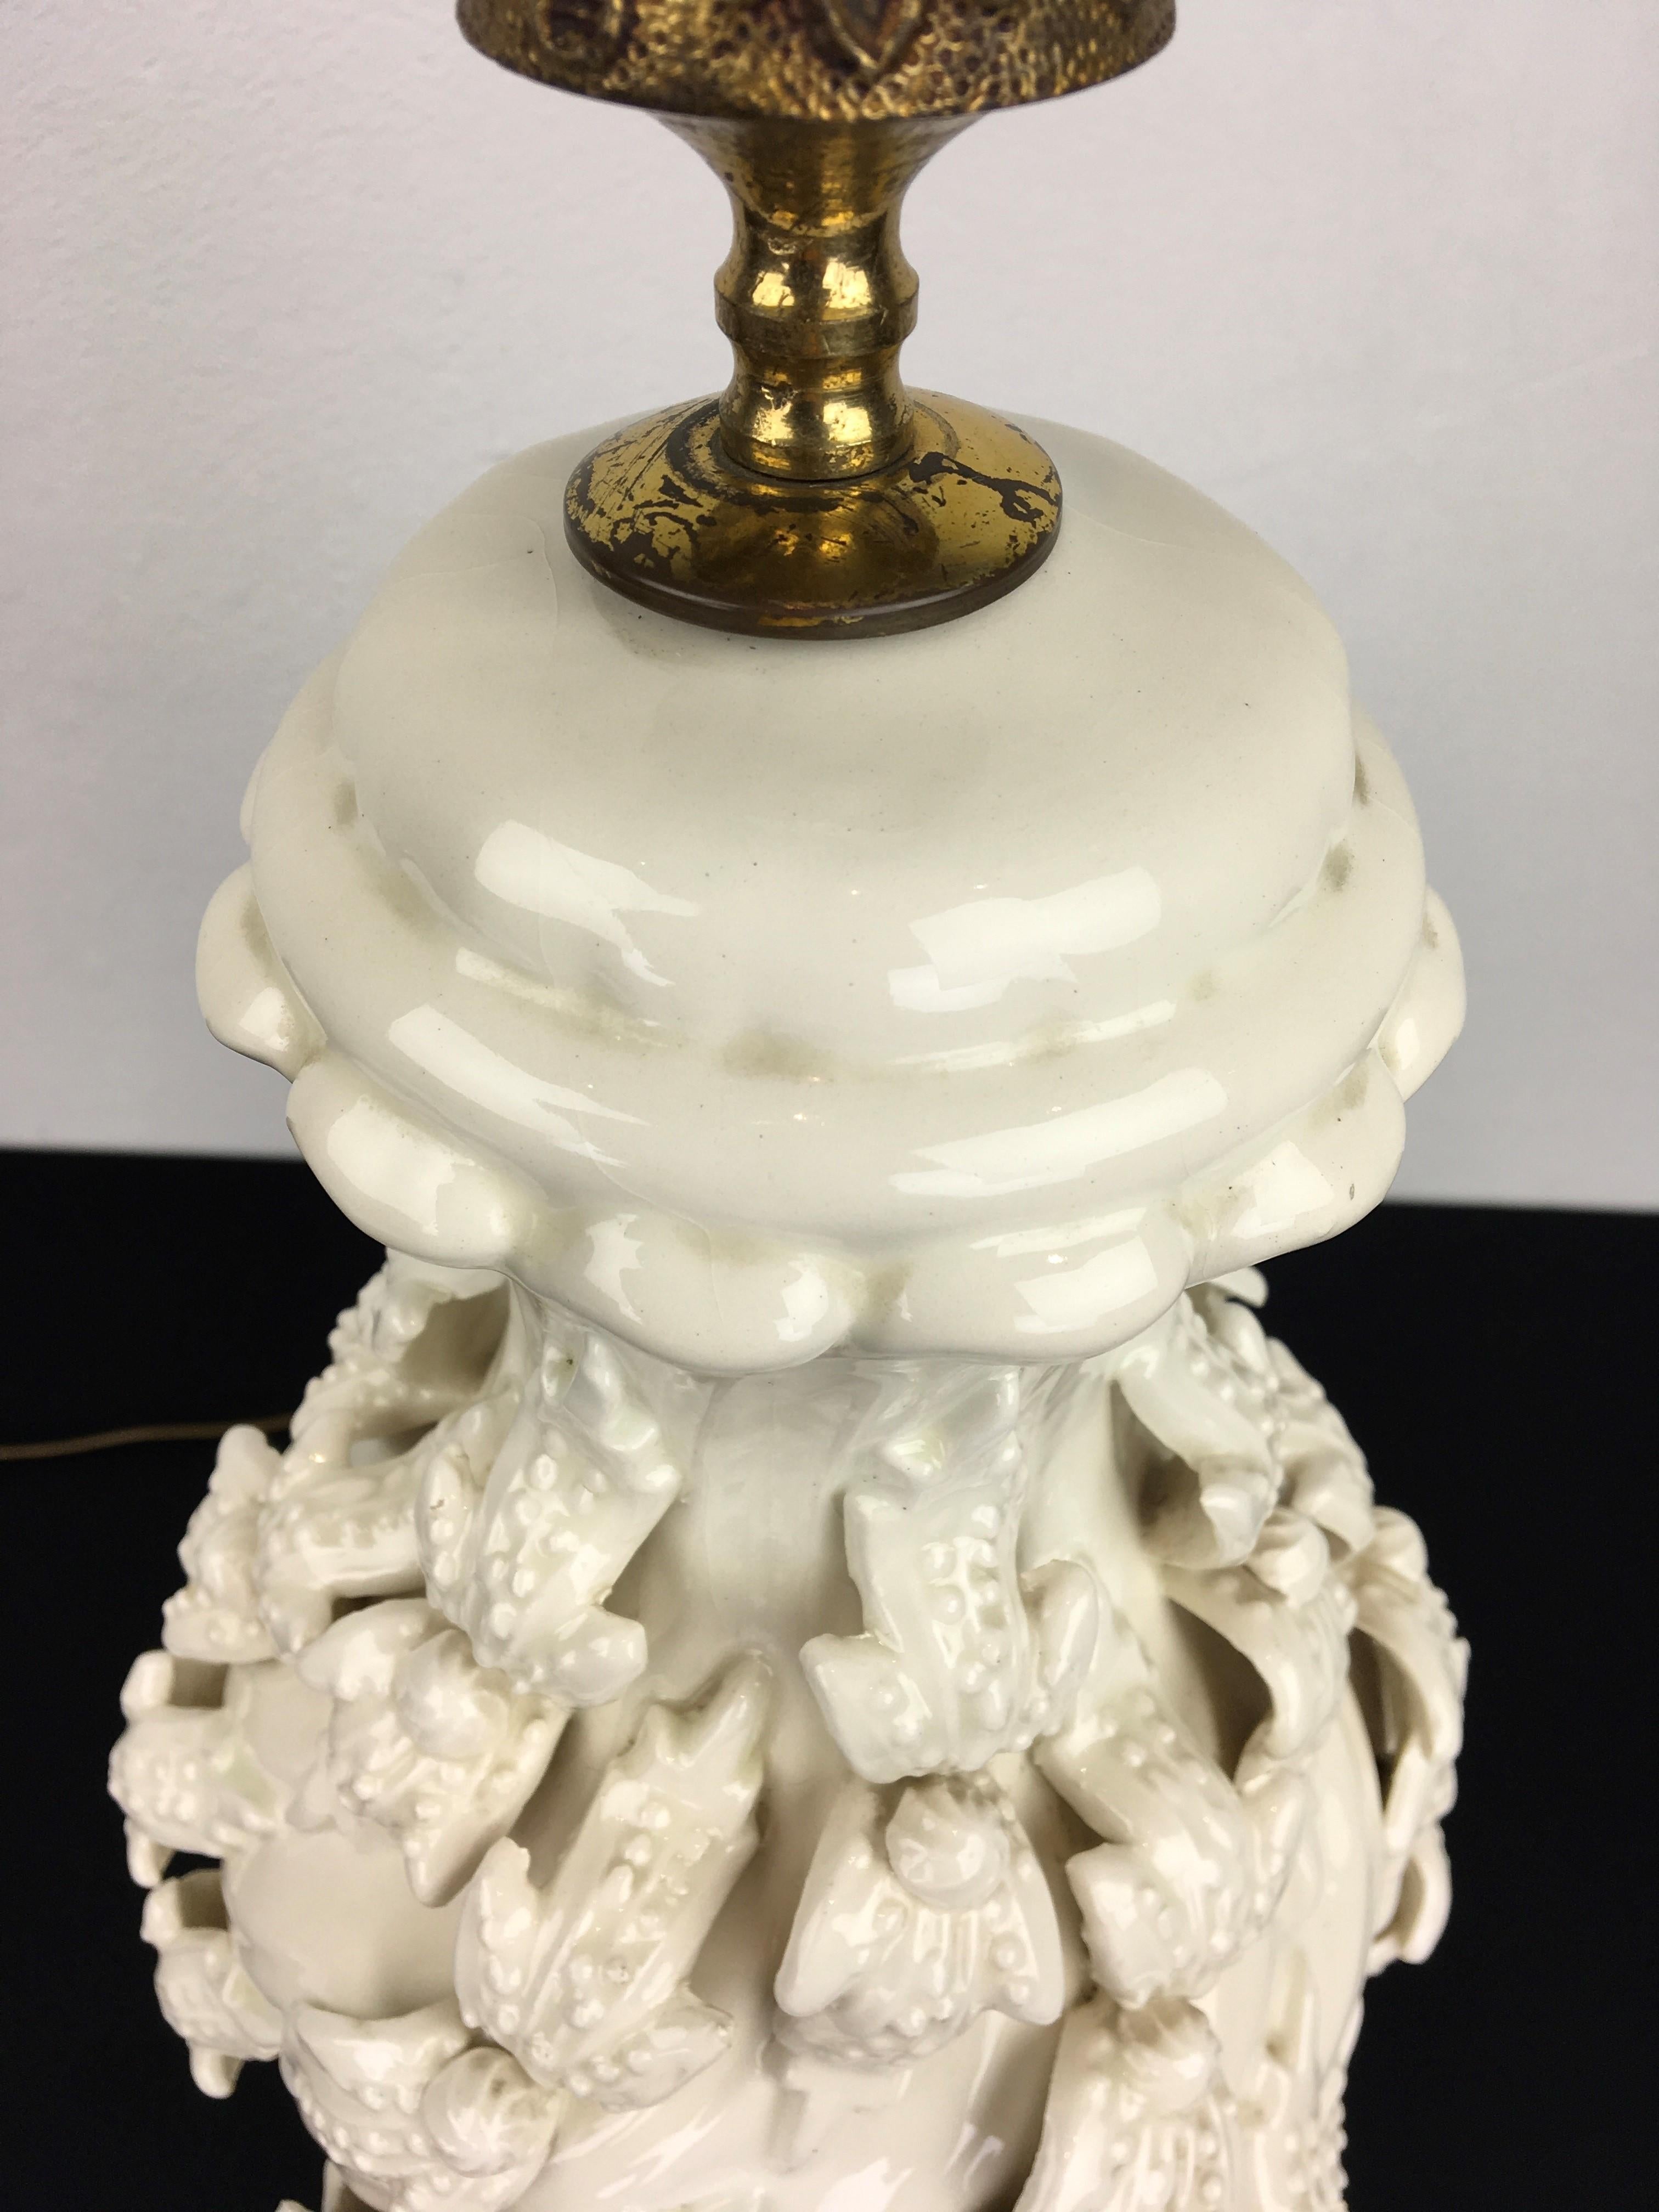 Spanish white manises ceramic table lamp with flowers. 
This white table lamp has beautiful flowers all around and is mounted on a gilded wooden base.
A white glazed sculptural ceramic table light from the 1960s, which will look very stylish in